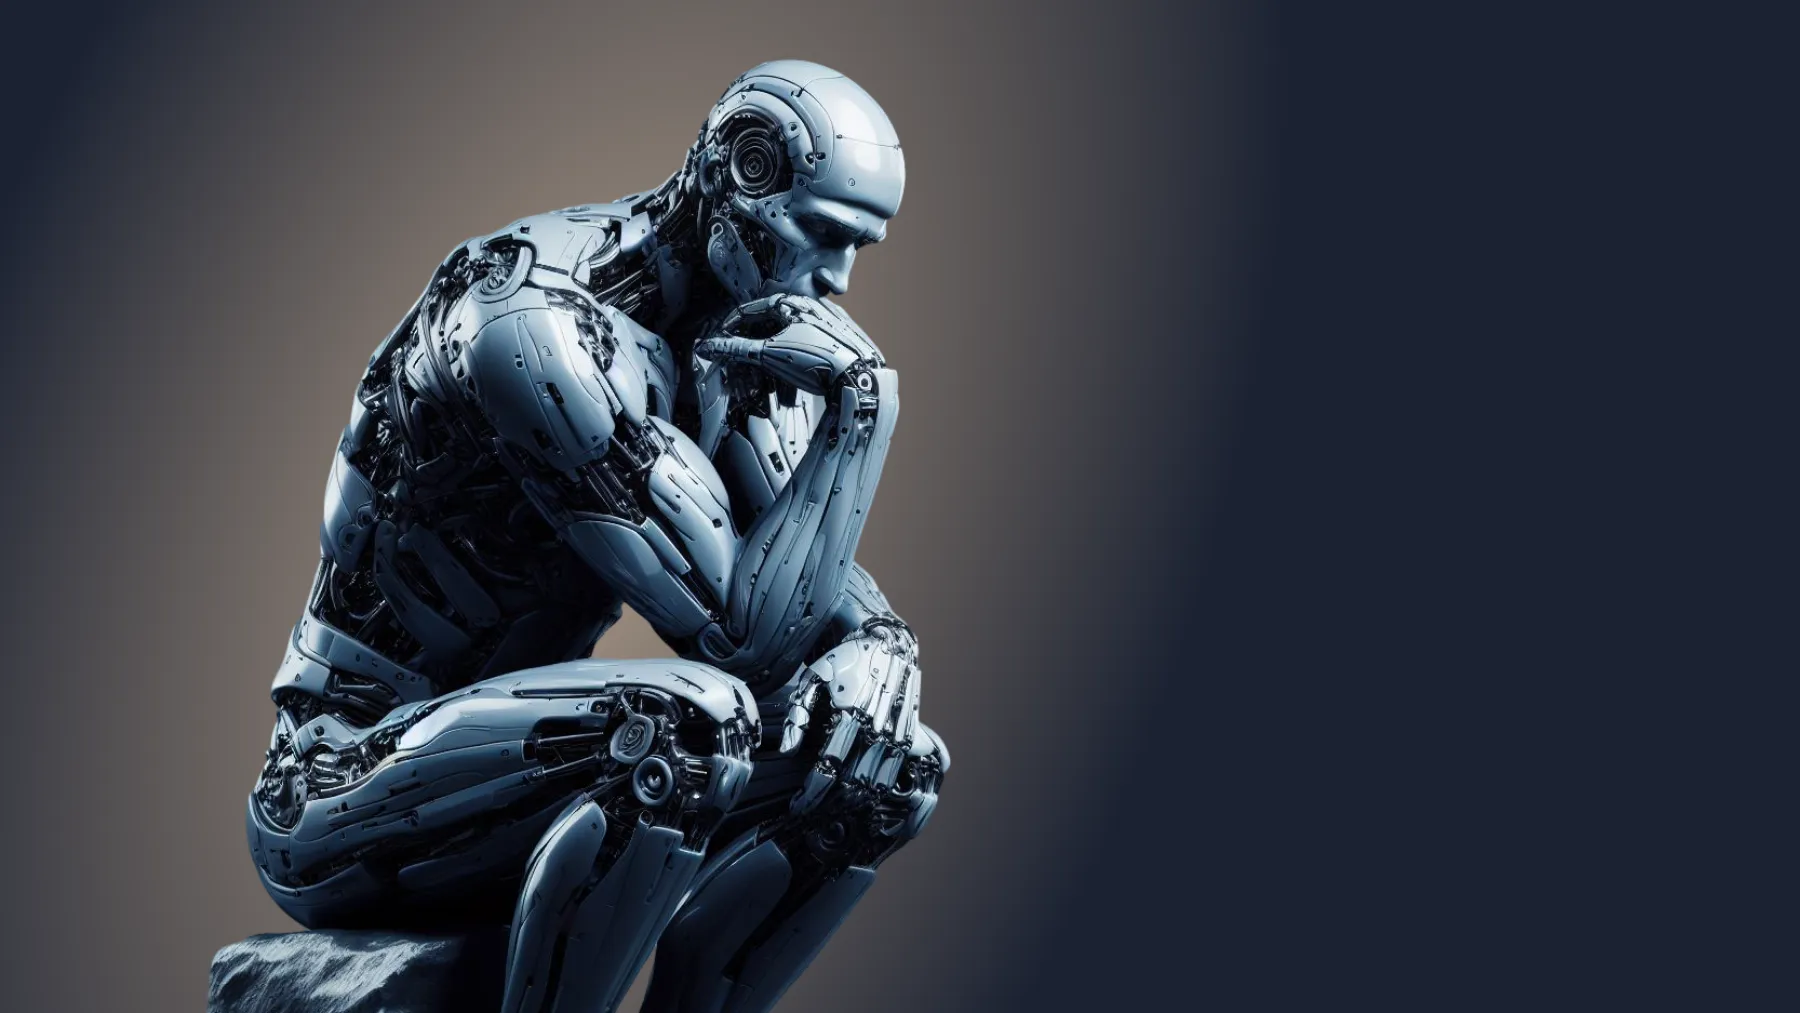 Cyborg, seated, chin on hand, reminiscent of Rodin's The Thinker statue